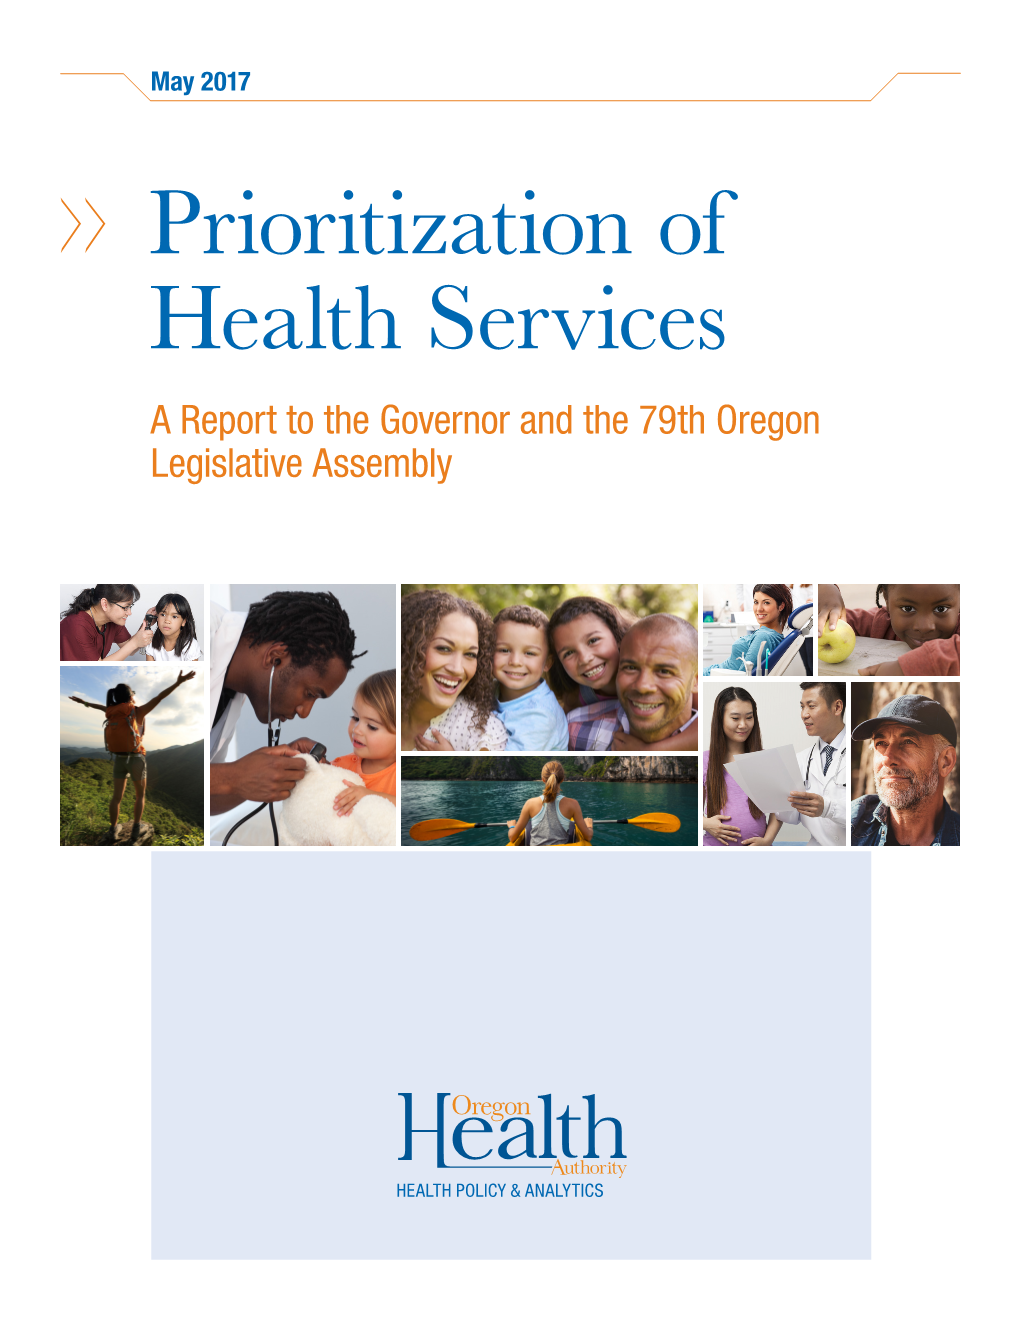 Prioritization of Health Services a Report to the Governor and the 79Th Oregon Legislative Assembly